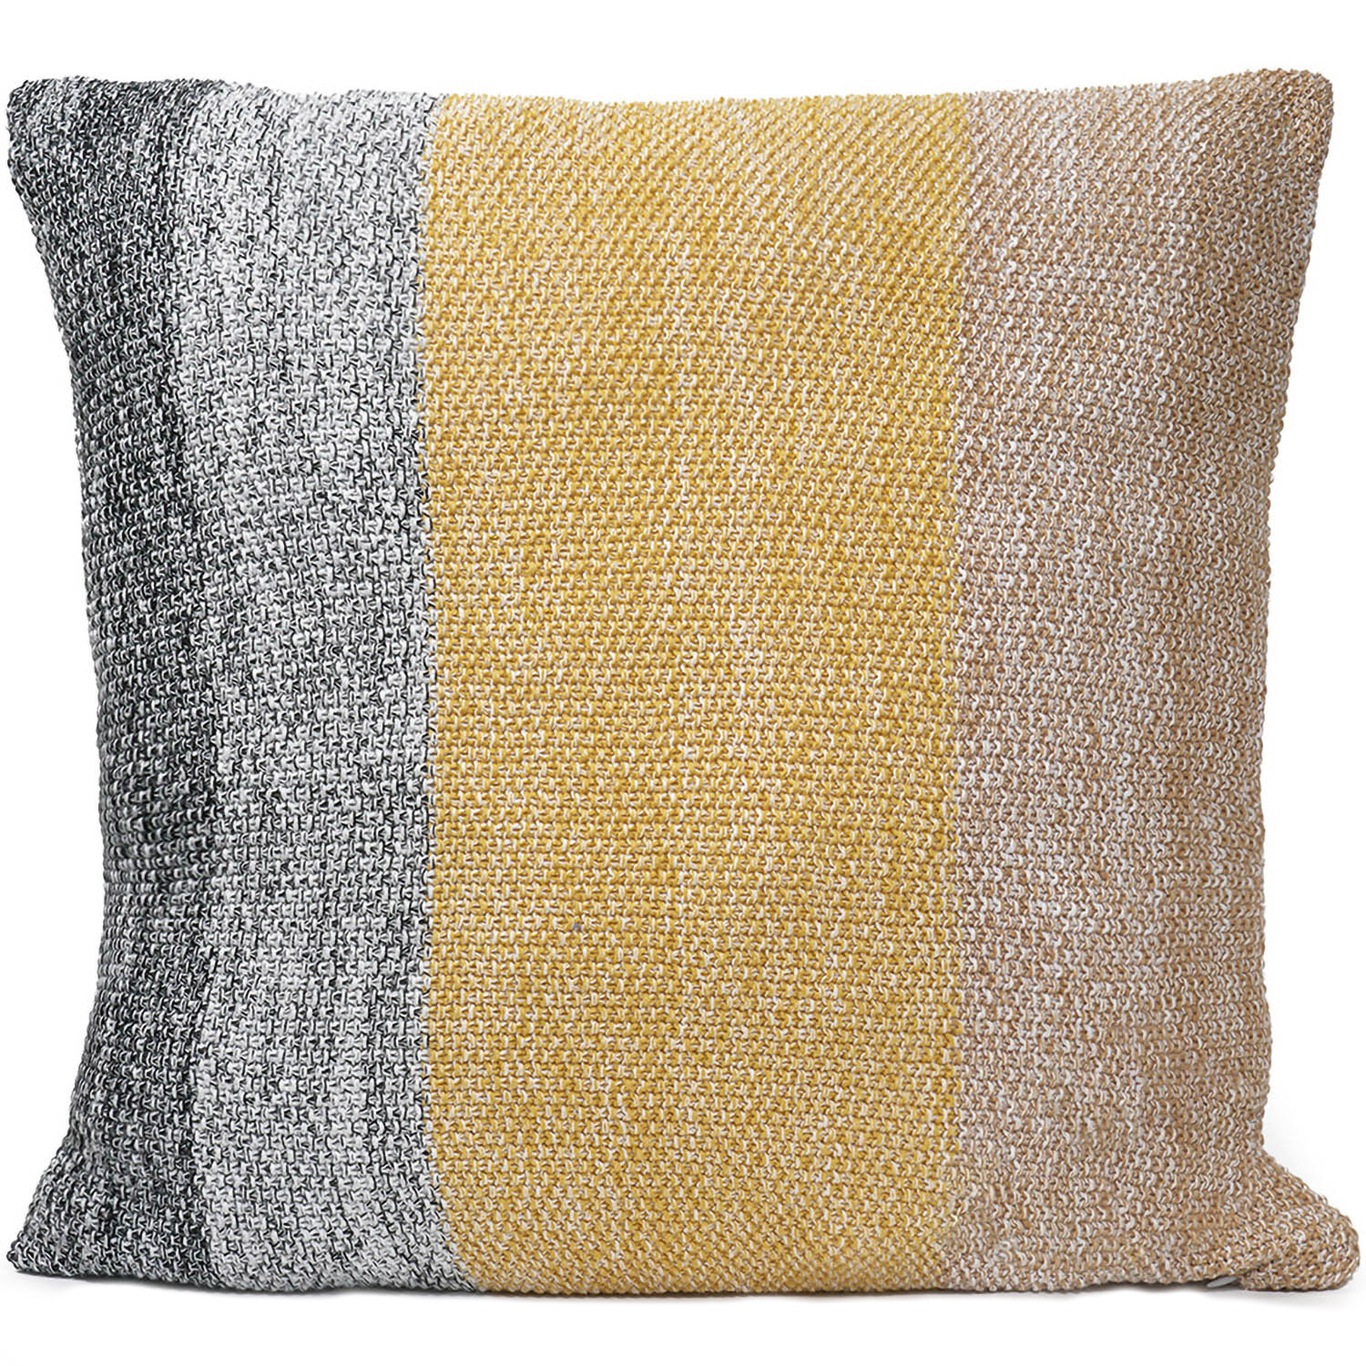 Knitted Stripes Cushion Cover 50x50 cm, Yellow